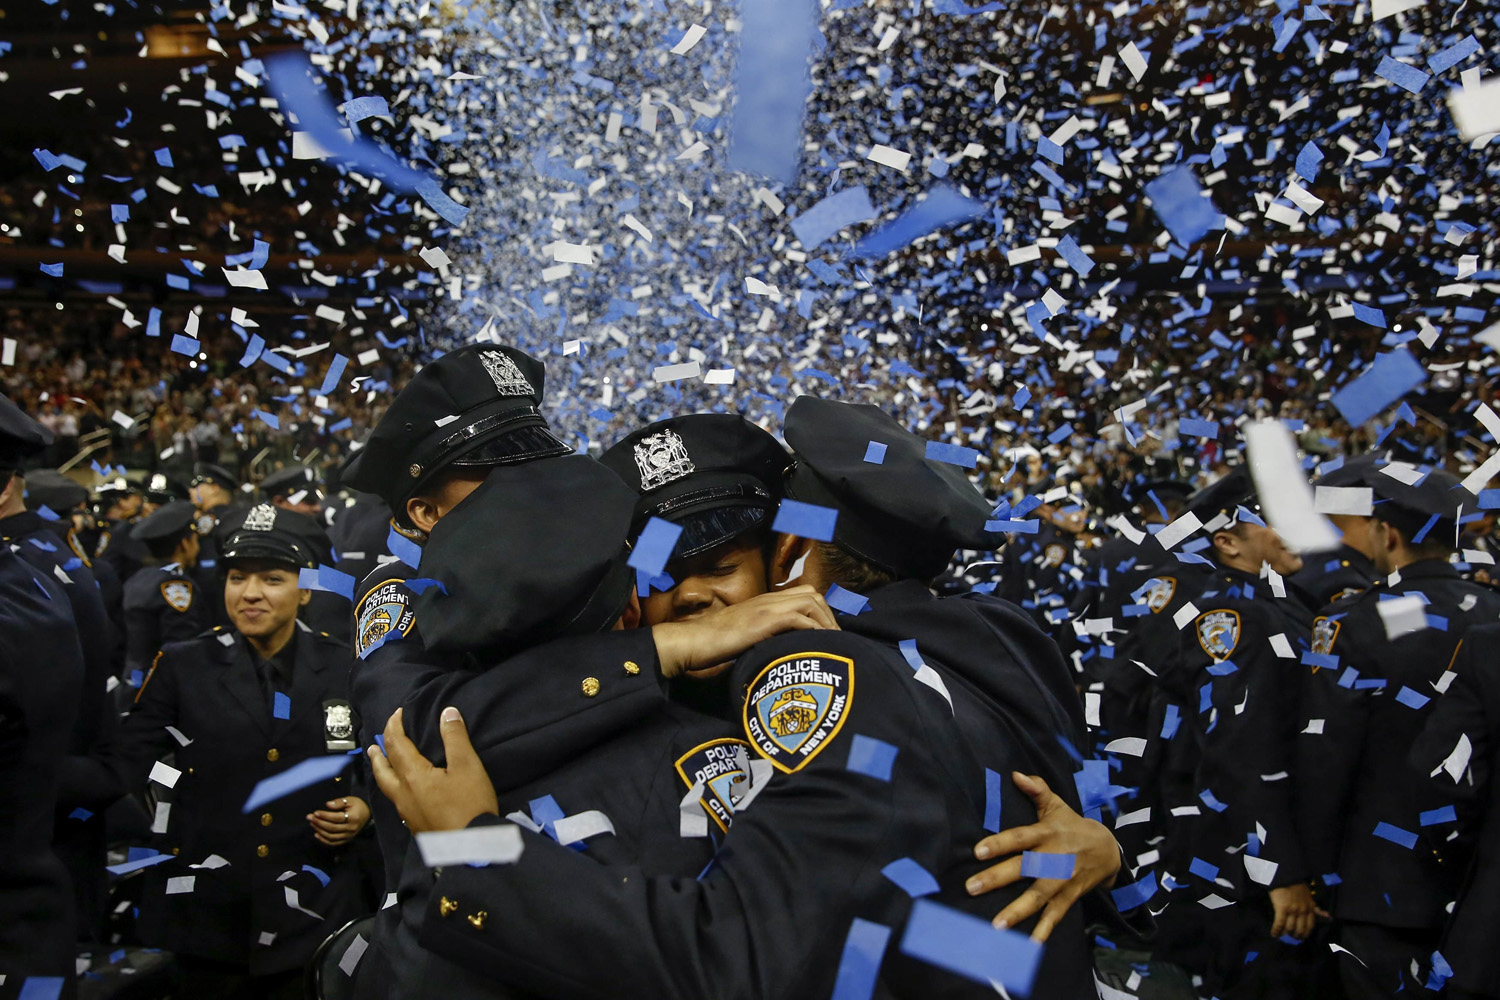 Members of the June 2014 graduating class of the New York City Police Academy embrace during their graduation ceremony at Madison Square Garden in New York